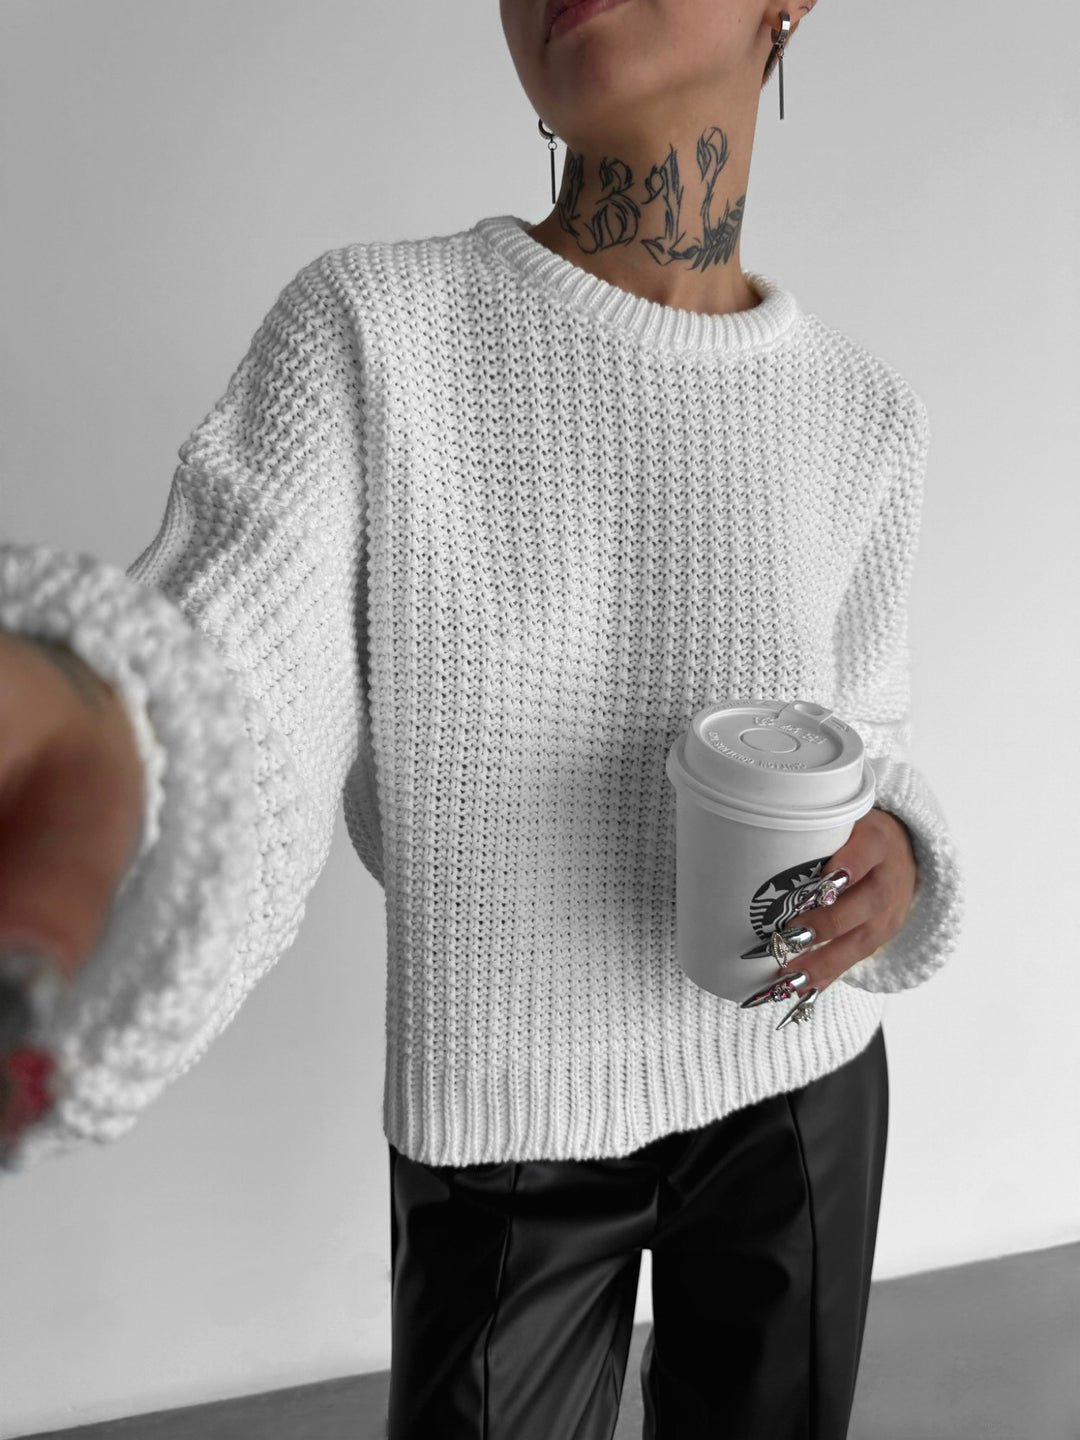 Oversize Puffer Arms Knit Sweater - White